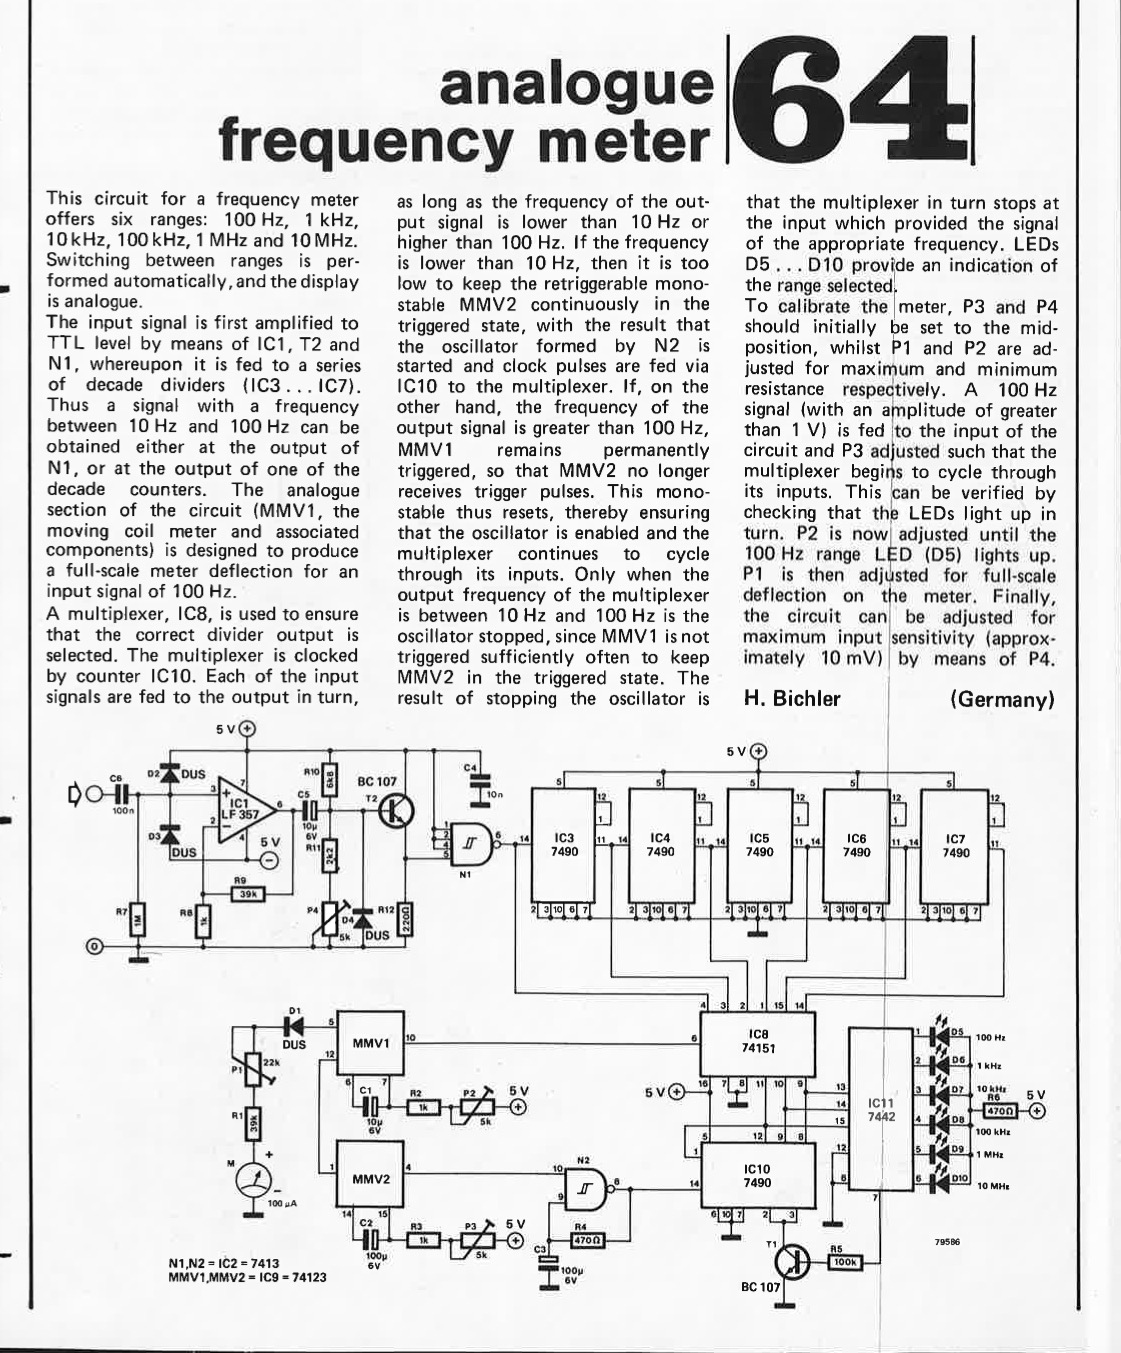 analogue frequency meter